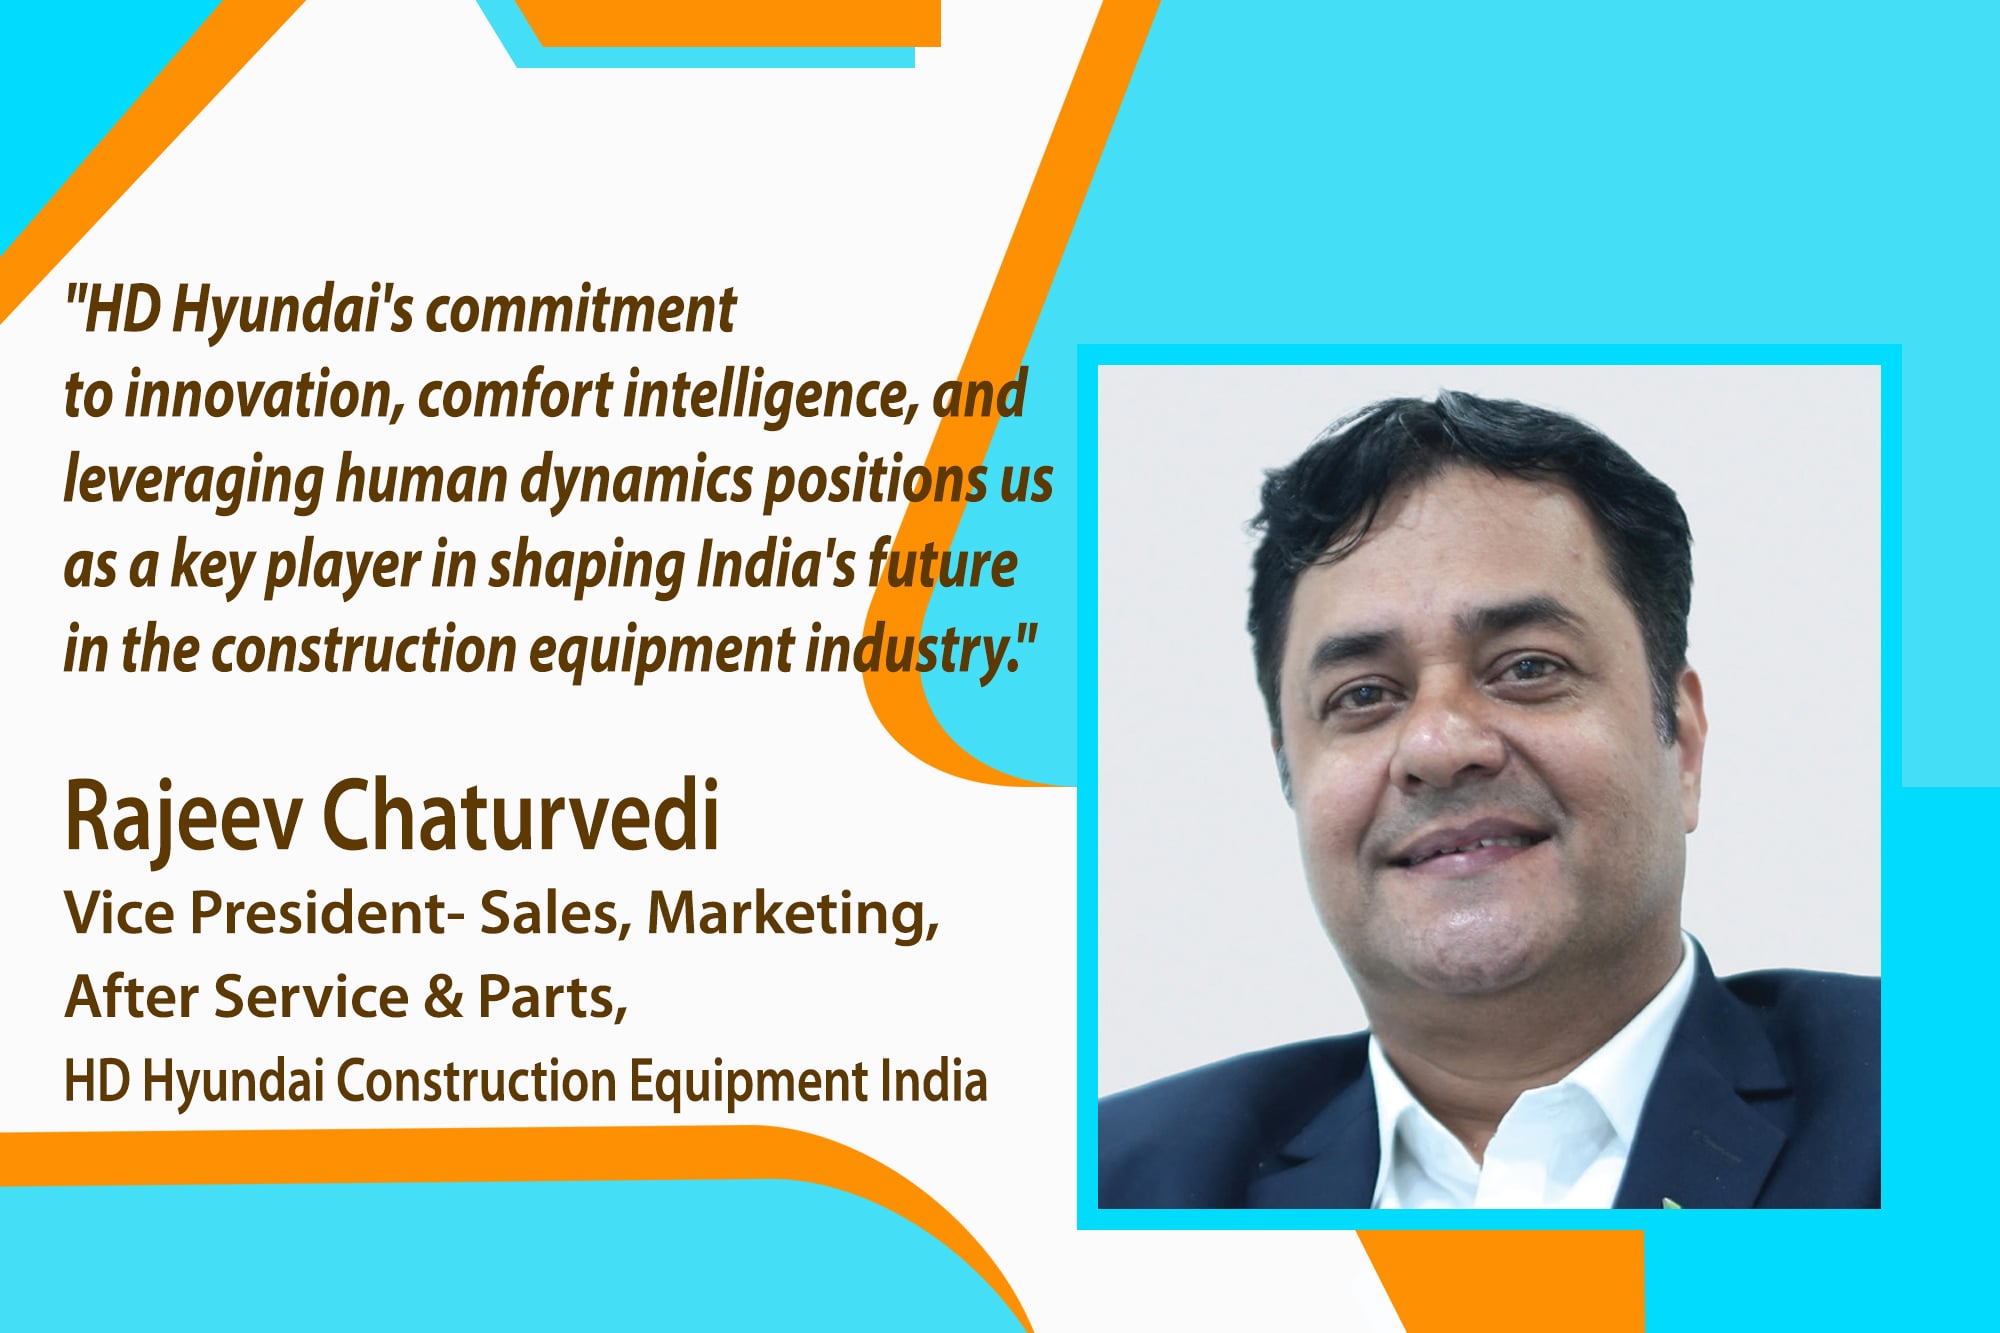 Rajeev Chaturvedi, Vice President- Sales, Marketing, After Service & Parts of HD Hyundai Construction Equipment India, provides critical insights into Hyundai's success, highlights groundbreaking innovations featured at Excon 2023, and unveils the unique strategy of leveraging 'human dynamics' for differentiation in a competitive industry.